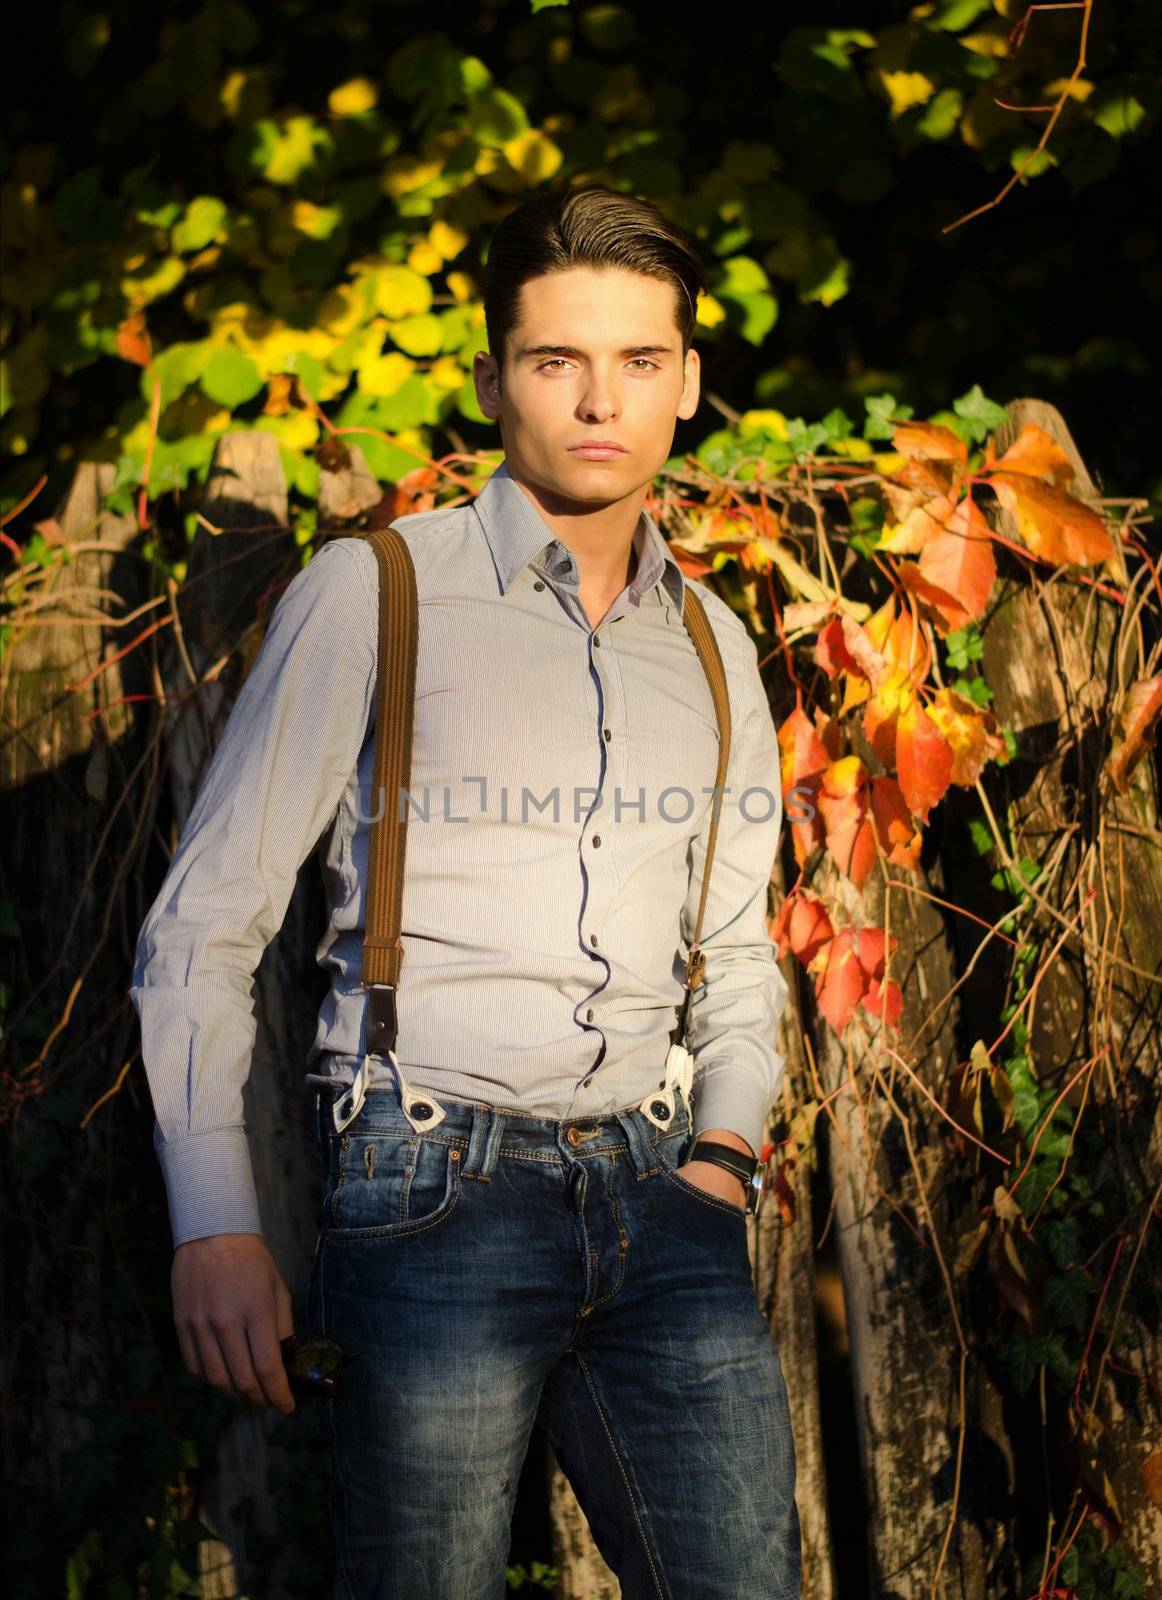 Attractive young male model outdoors in nature in beautiful sunset light